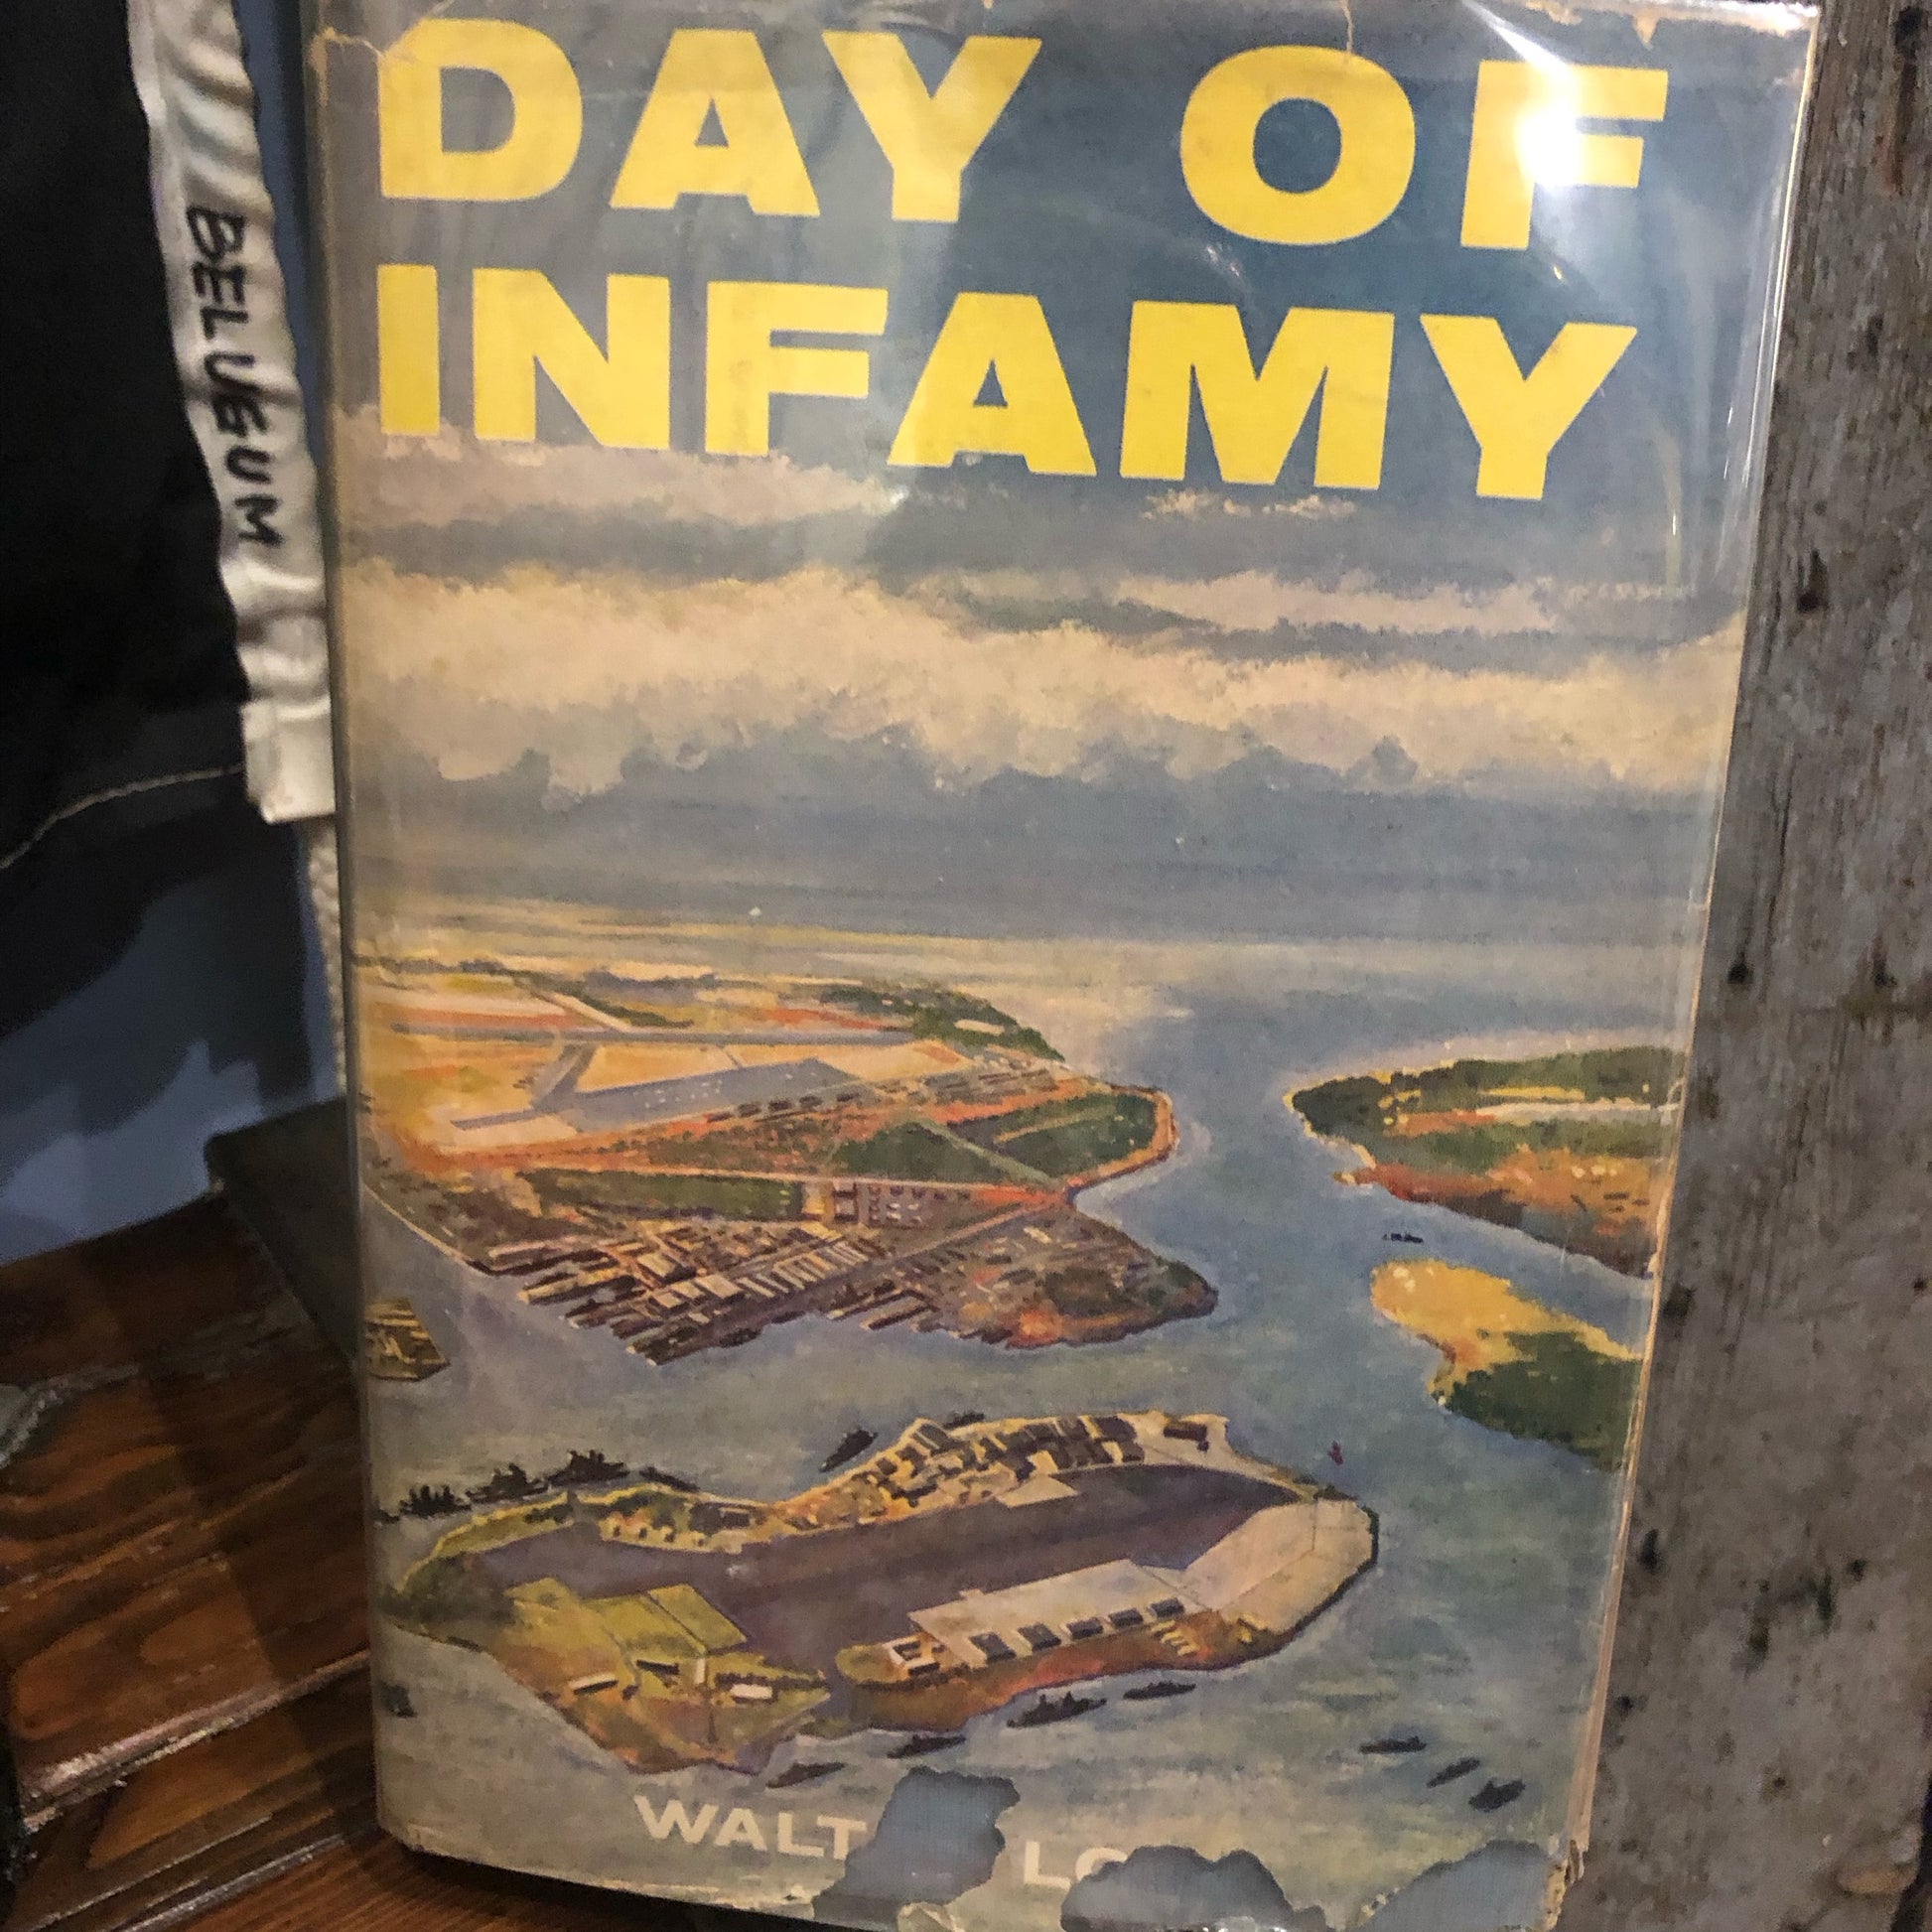 Day of Infamy, Walter Lord, Henry Holt and Company, NY, 1957 - Annapolis Maritime Antiques